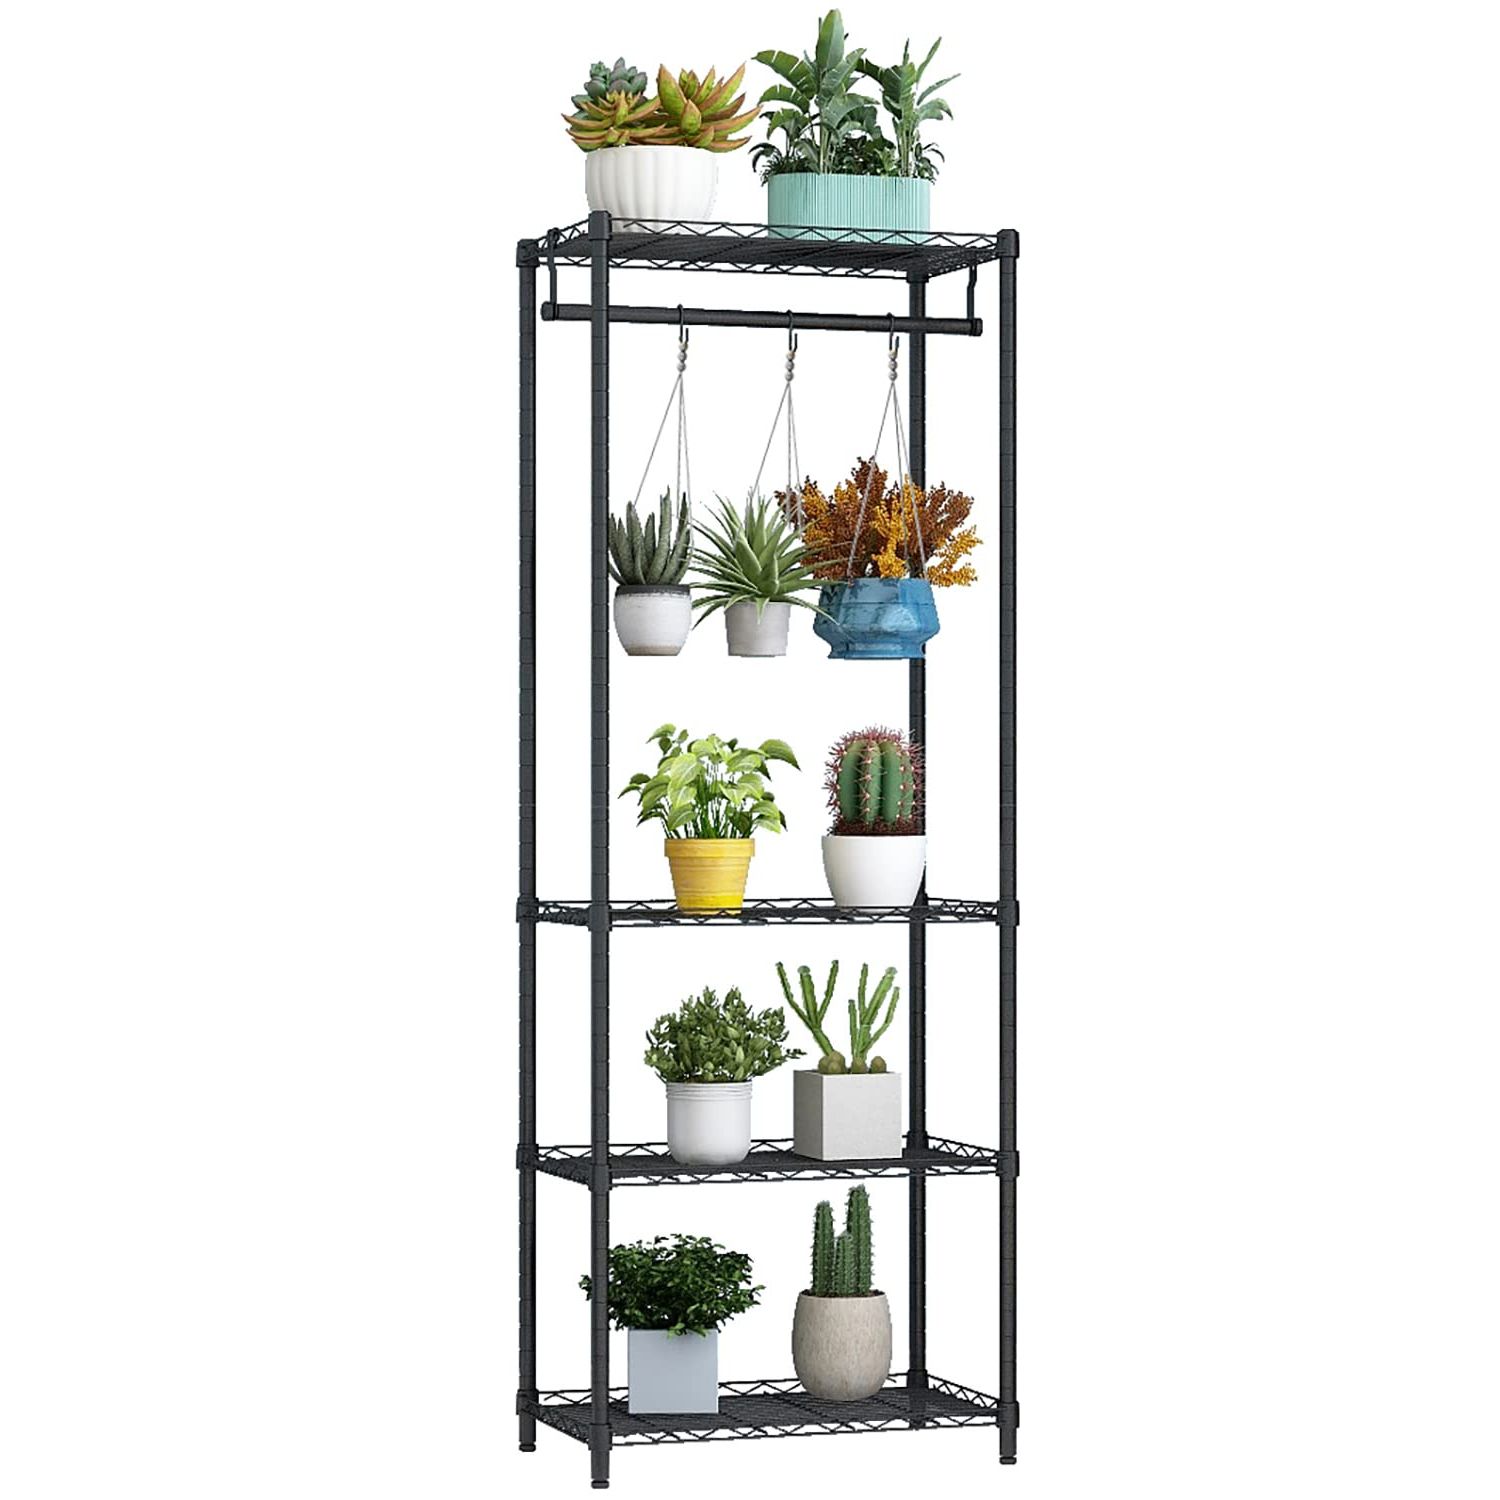 Best And Newest Amazon: Xiofio 4 Tier Plant Shelf For Indoor Plants Outdoor, Large  Multiple Flower Pot Holder Rack，hanging Plant Stand 6pcs Hooks ,adjustable Plant  Stand Suitable For Bedroom Living Room Balcony Garden,black : Patio, Lawn Regarding 4 Tier Plant Stands (View 6 of 10)